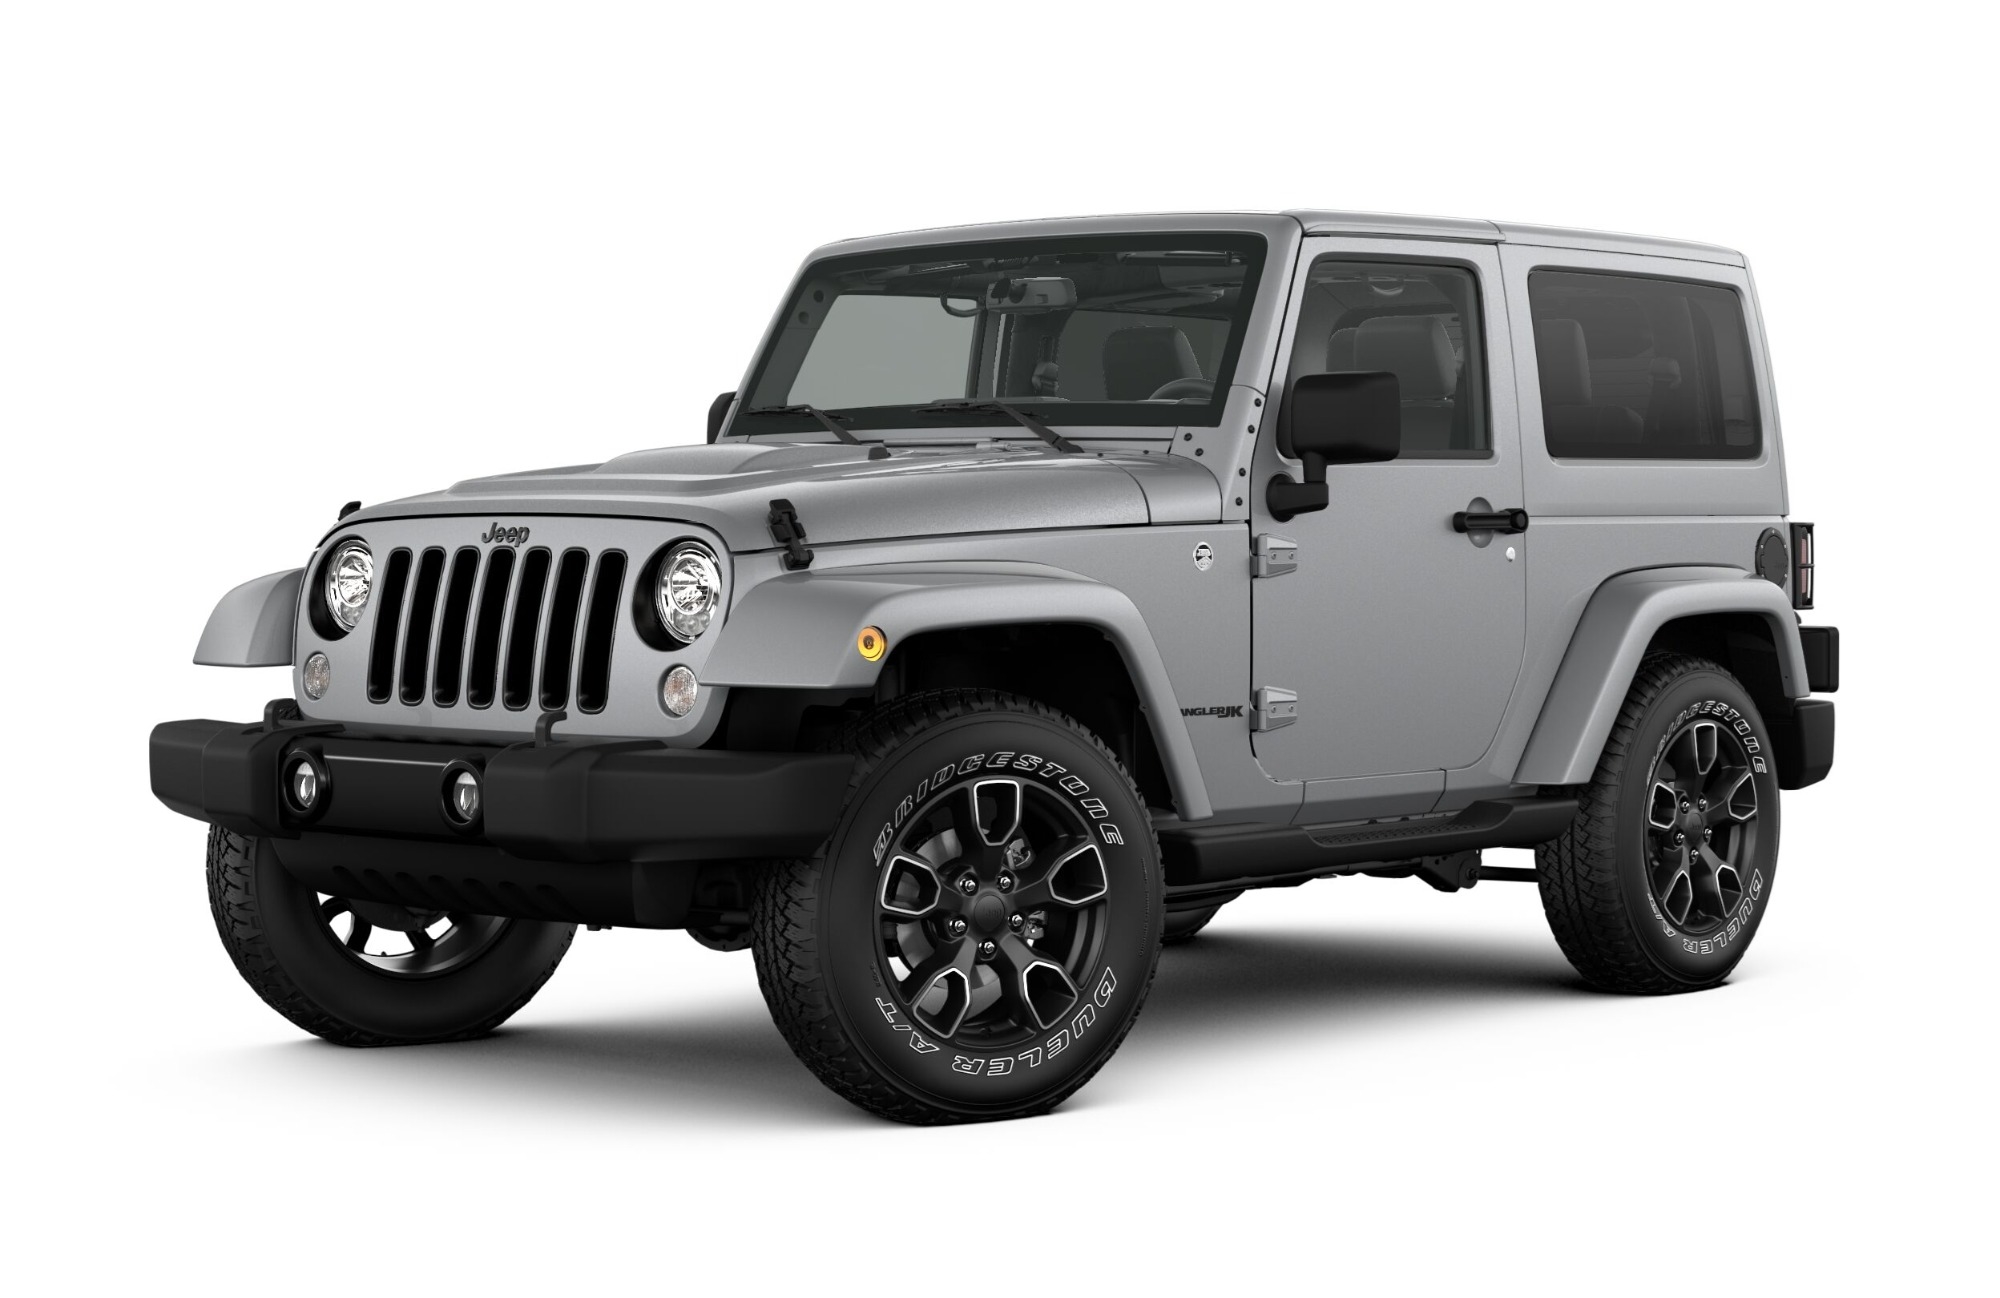 2018 Jeep Wrangler JK Altitude Full Specs, Features and Price | CarBuzz